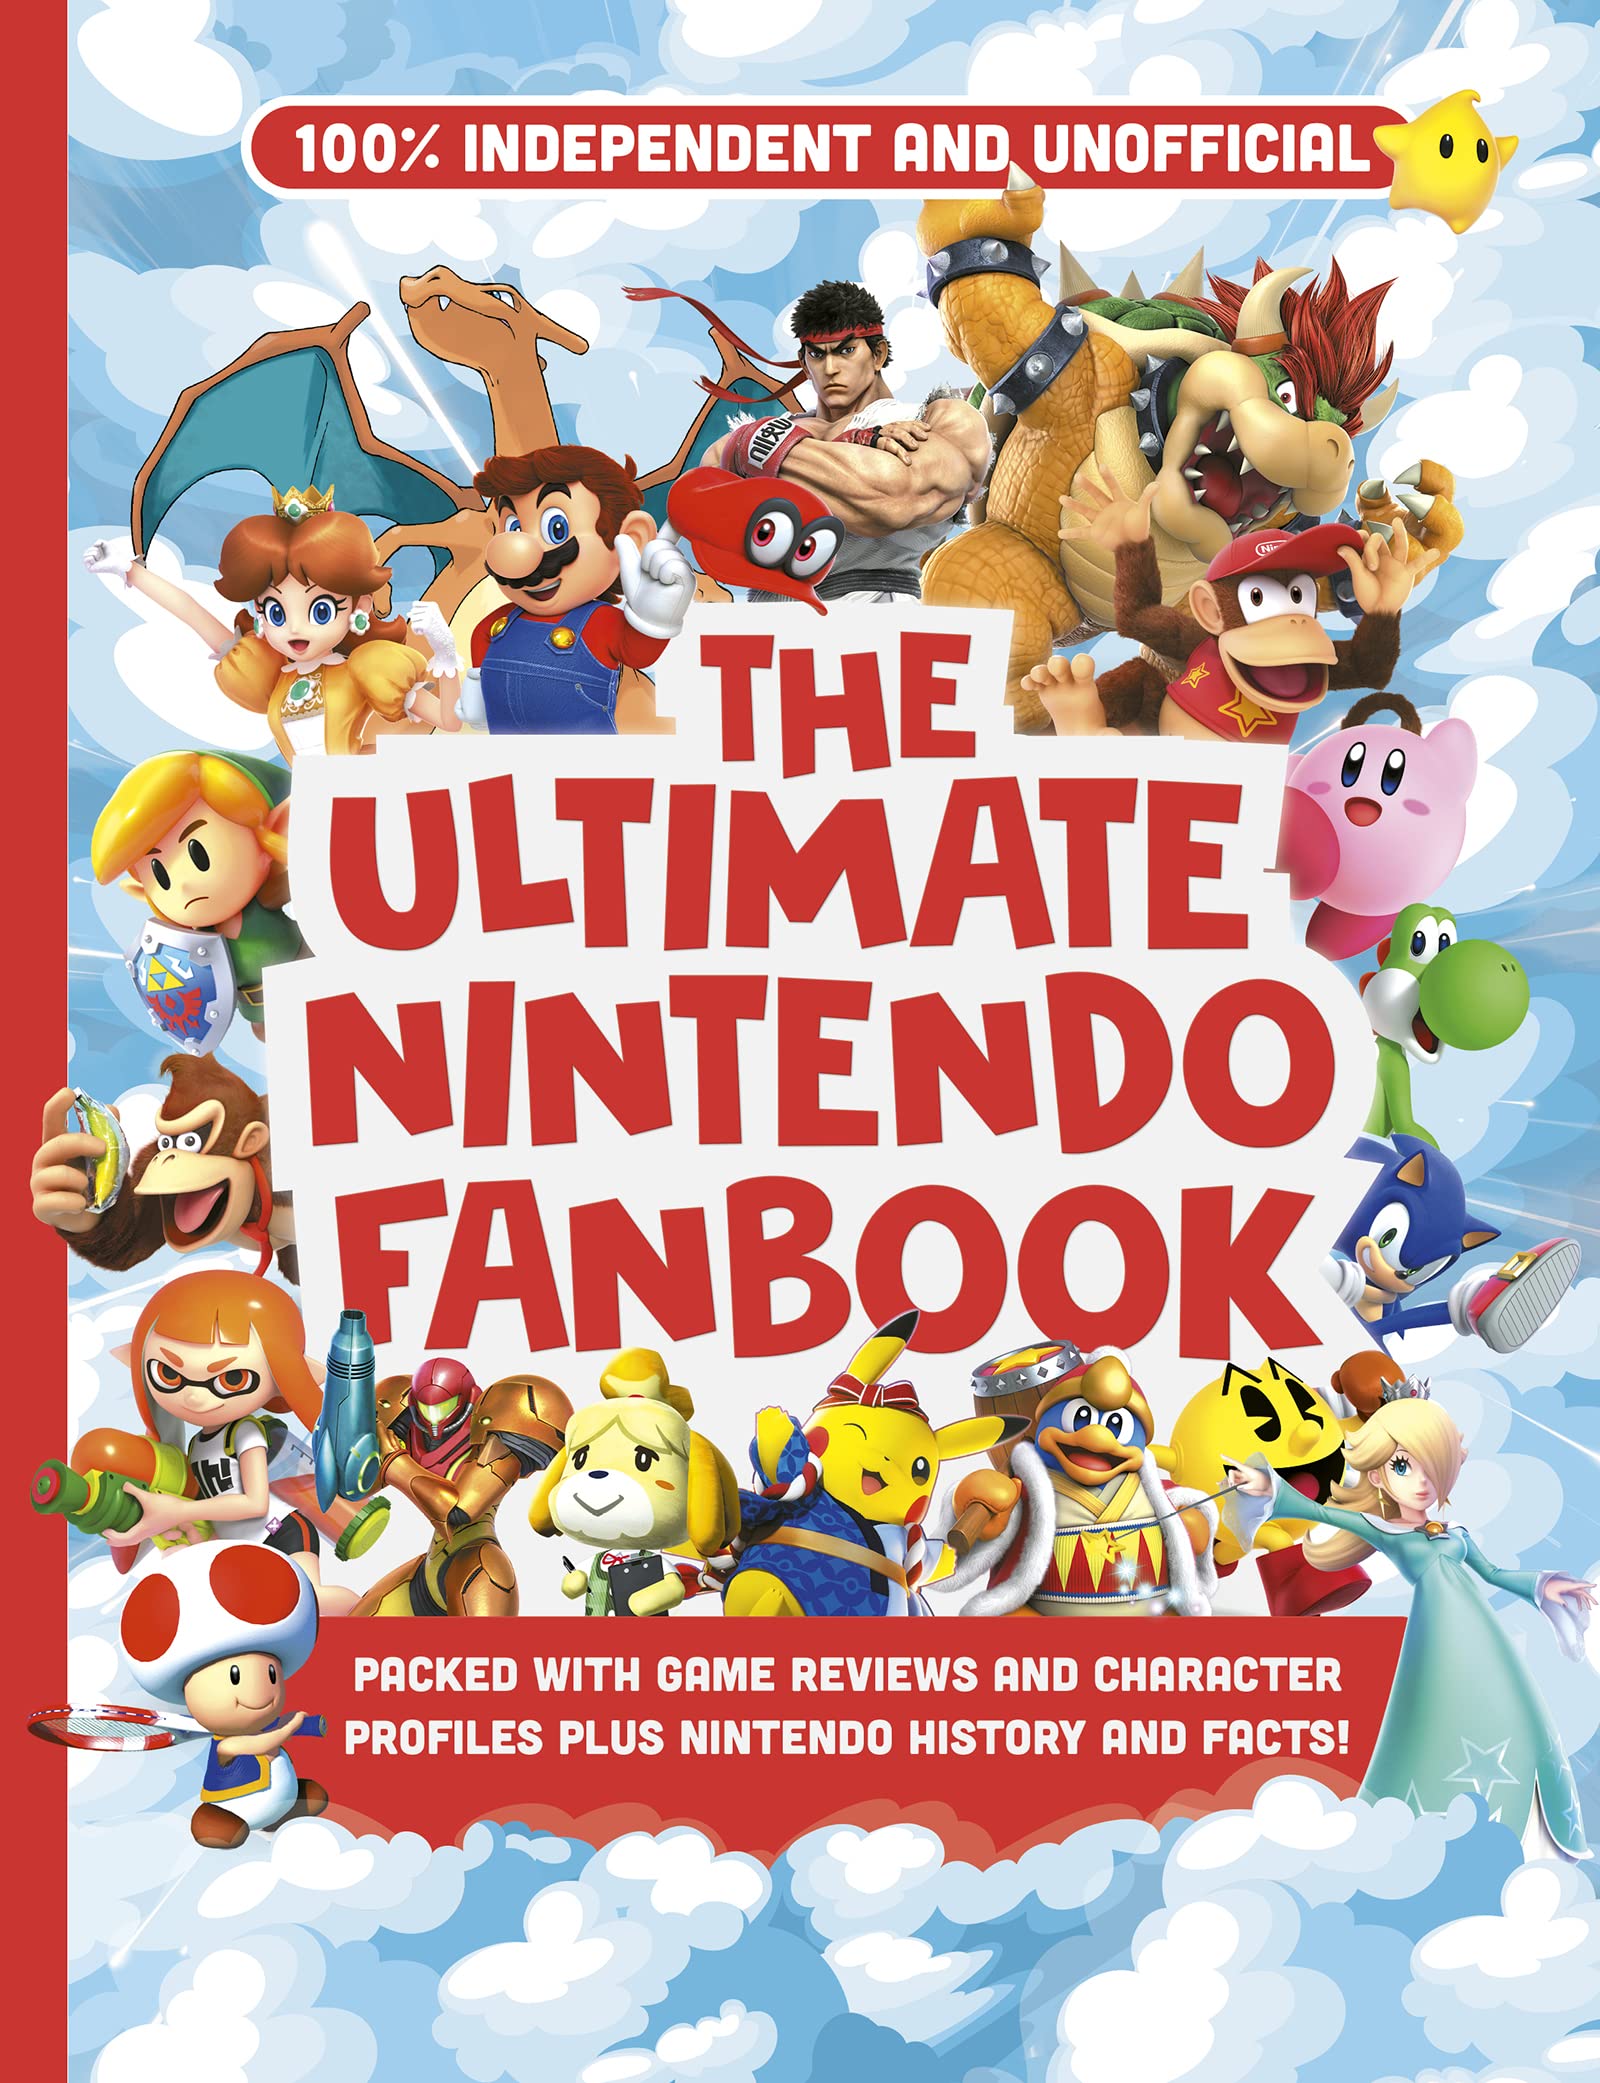 The Ultimate Nintendo Fanbook: The Best Nintendo Games, Characters and more!